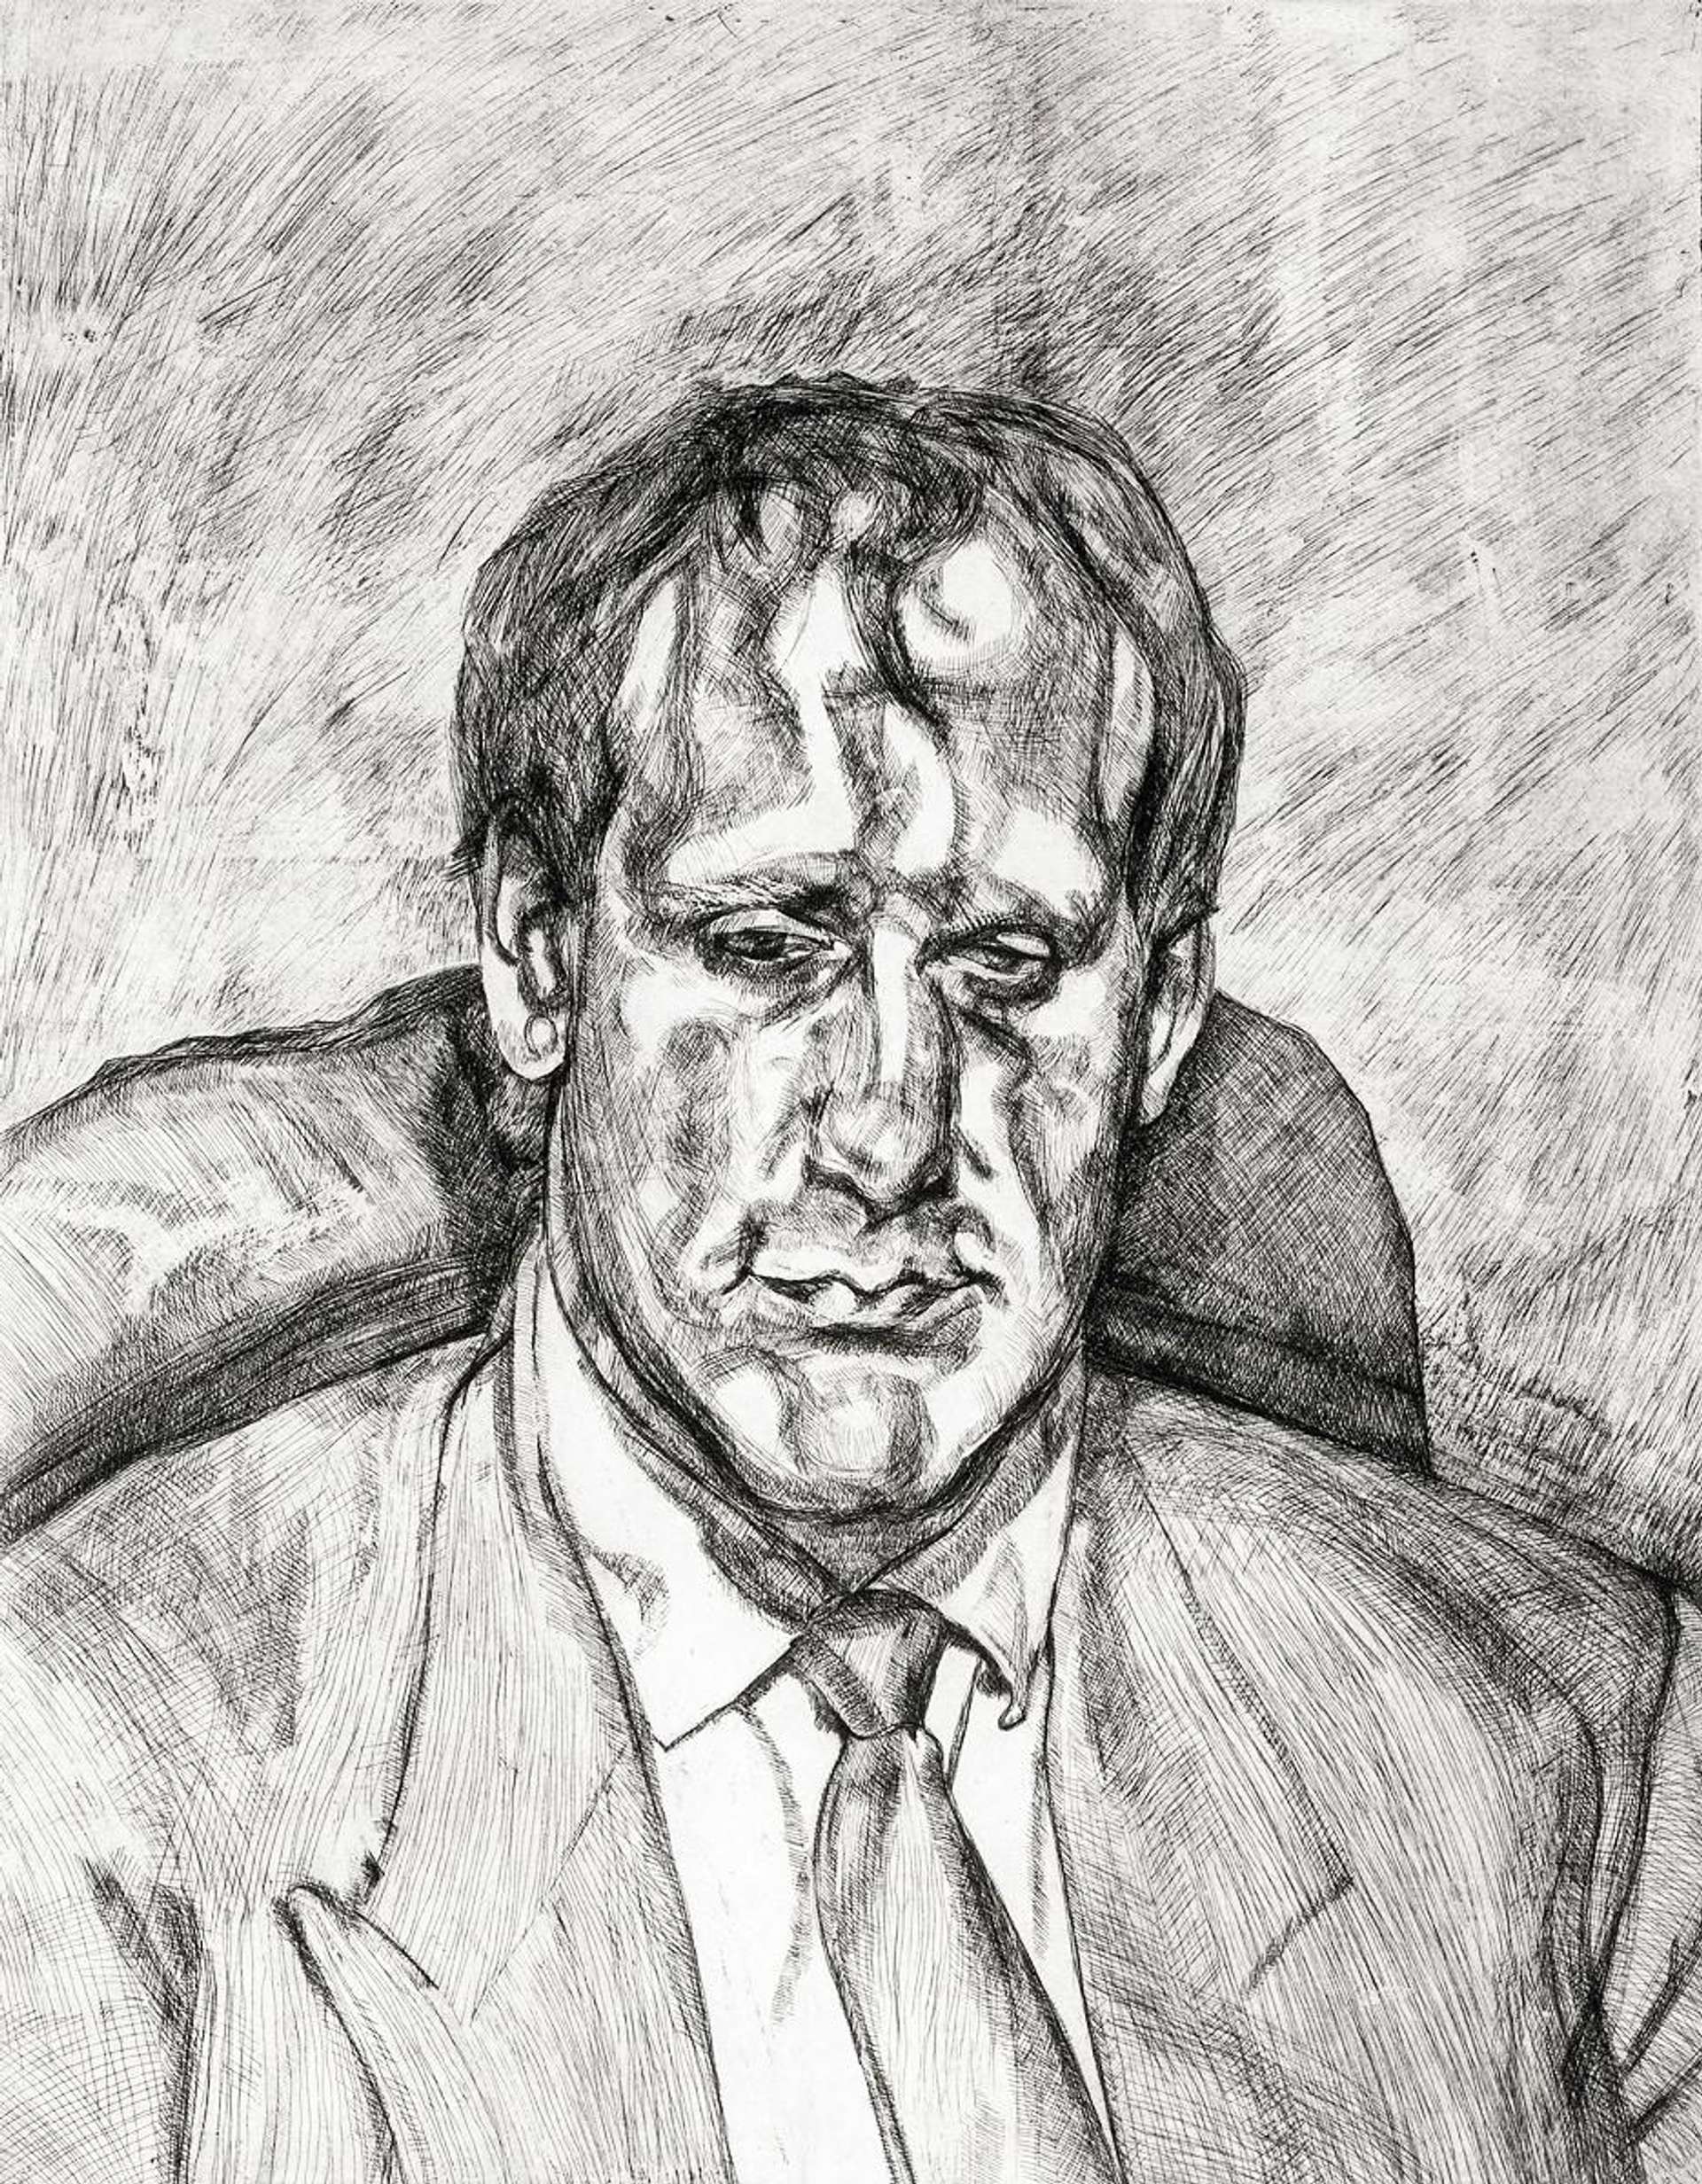 Lucian Freud's Head Of An Irishman. A drawing of a man wearing a suit and tie sitting in a chair, looking down.